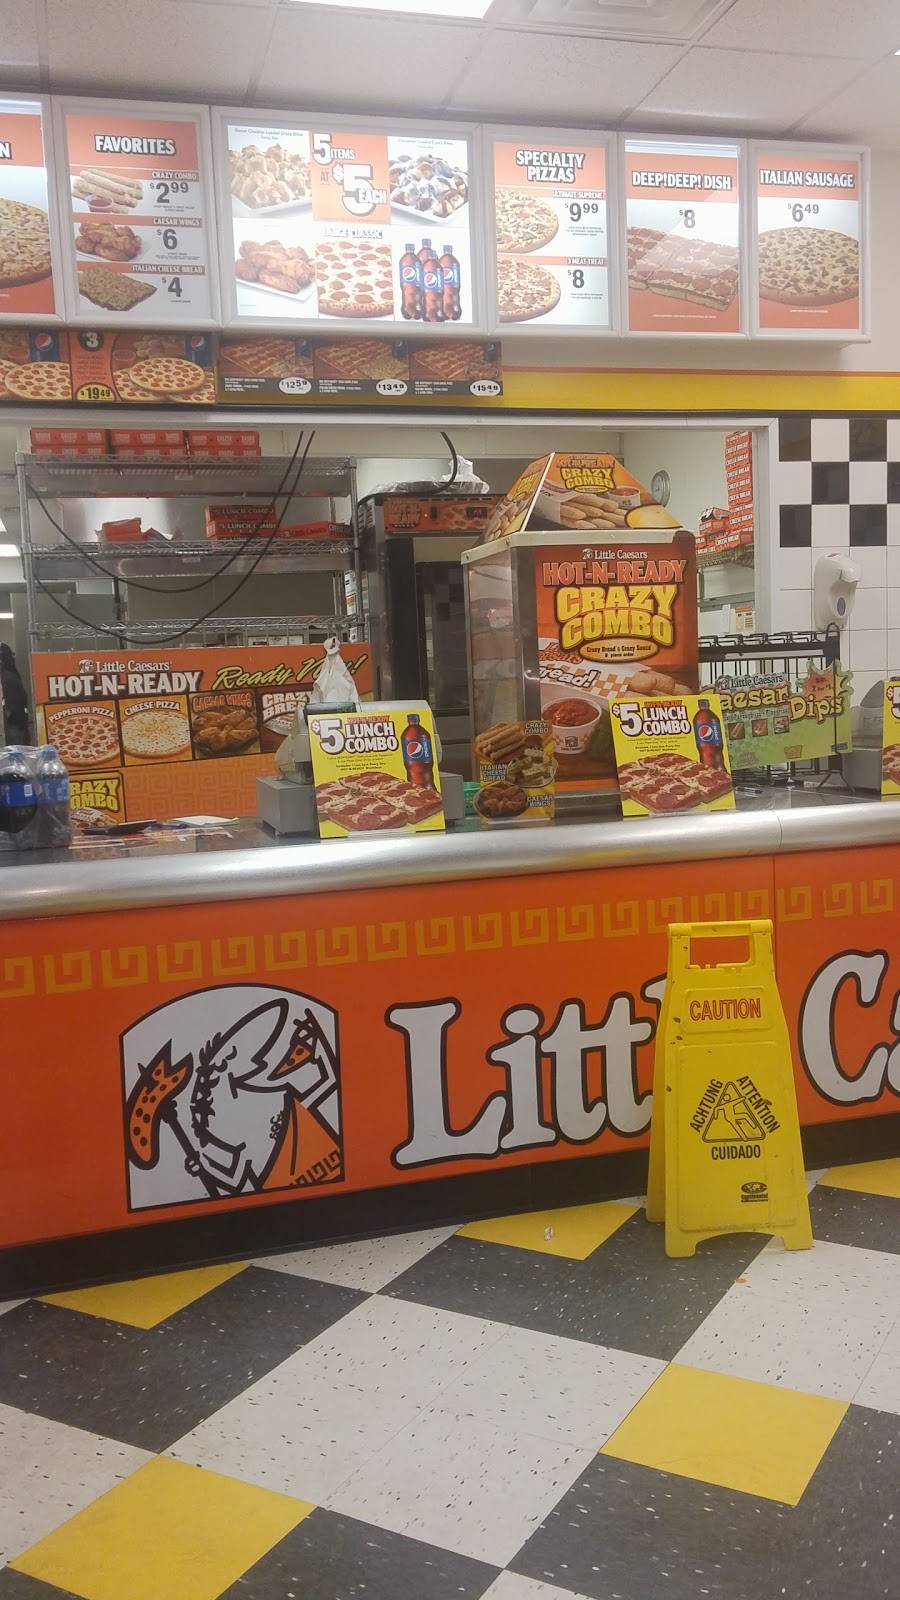 Little Caesars Pizza | meal takeaway | 3200 S Lancaster Rd, Dallas, TX 75216, USA | 2143745500 OR +1 214-374-5500